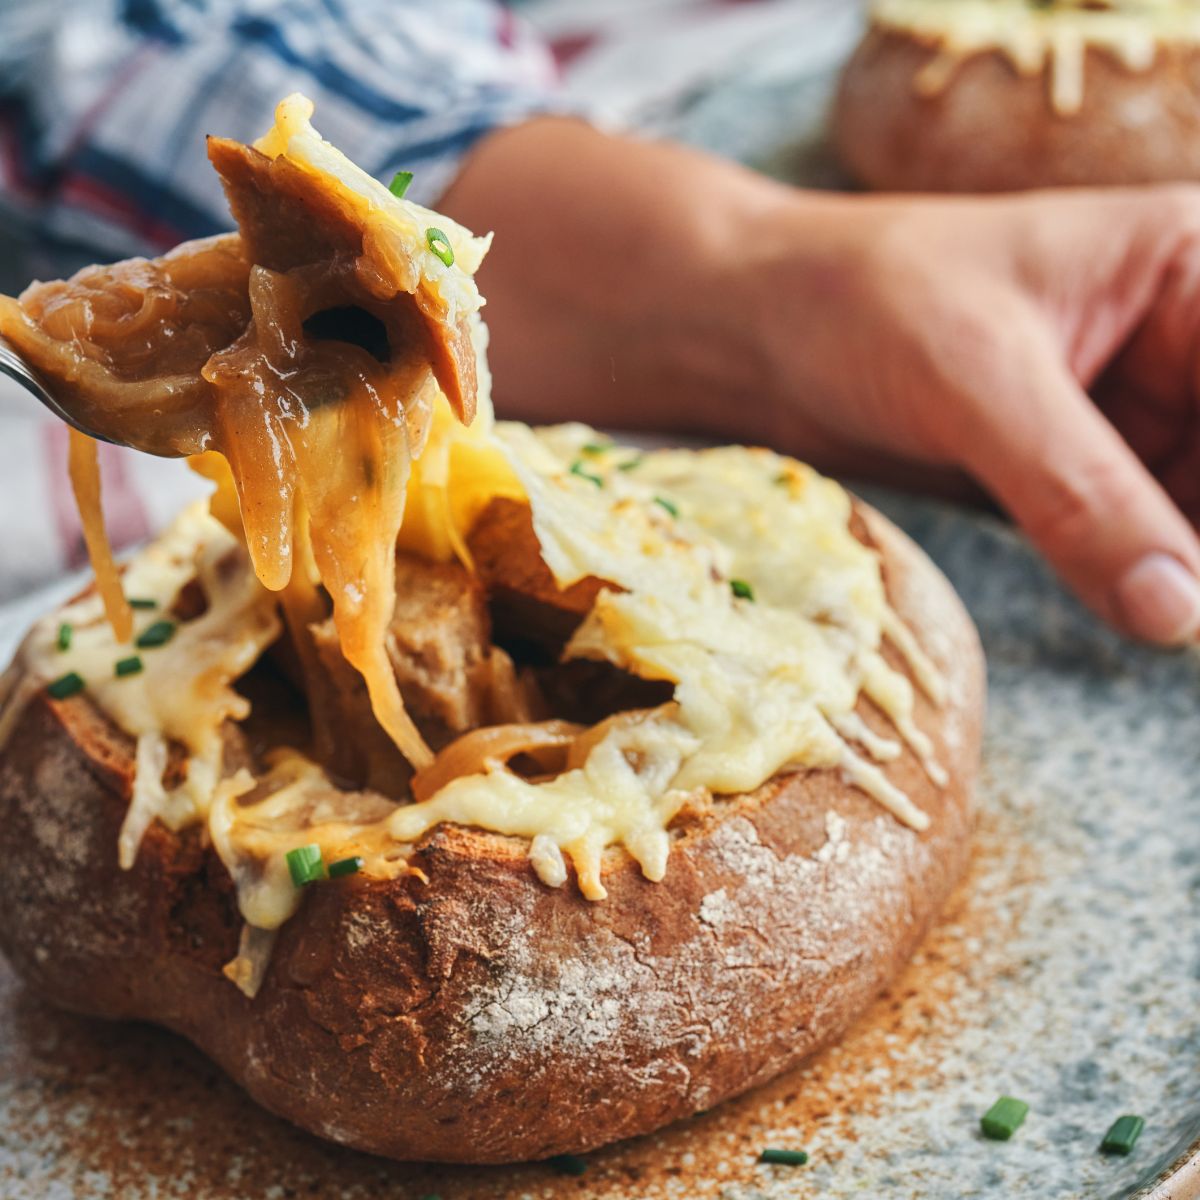 a man's hand taking a spoonful of French onion soup from a bread bowl.